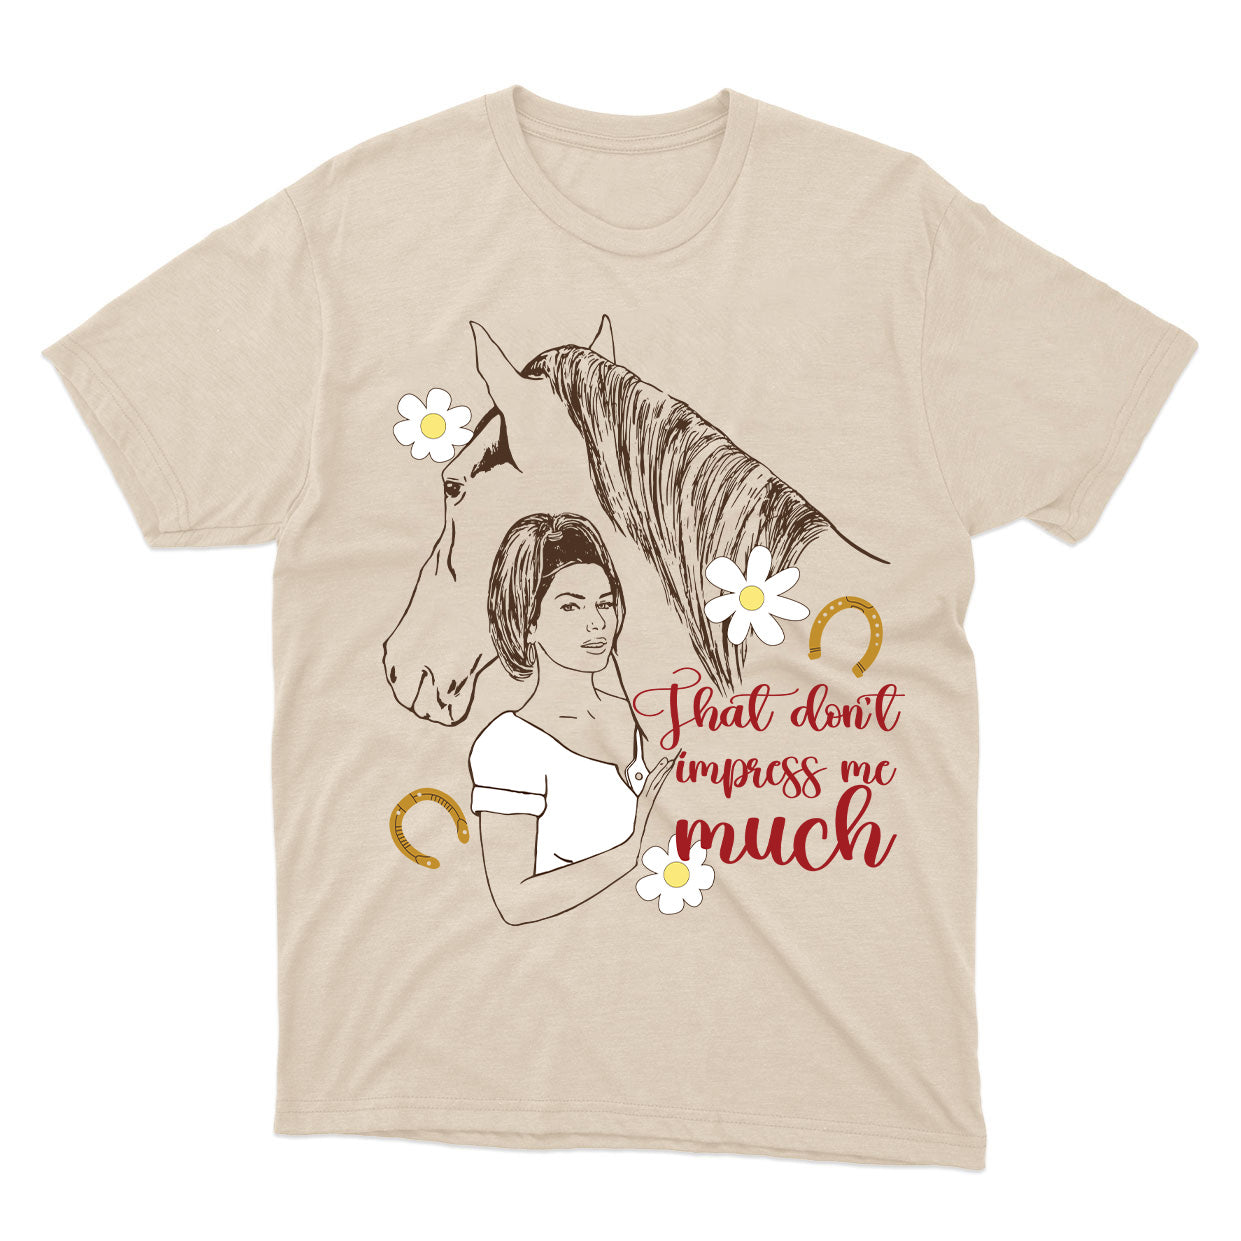 THAT DON'T IMPRESS ME MUCH (Shania Twain) t-shirt unisexe - tamelo boutique